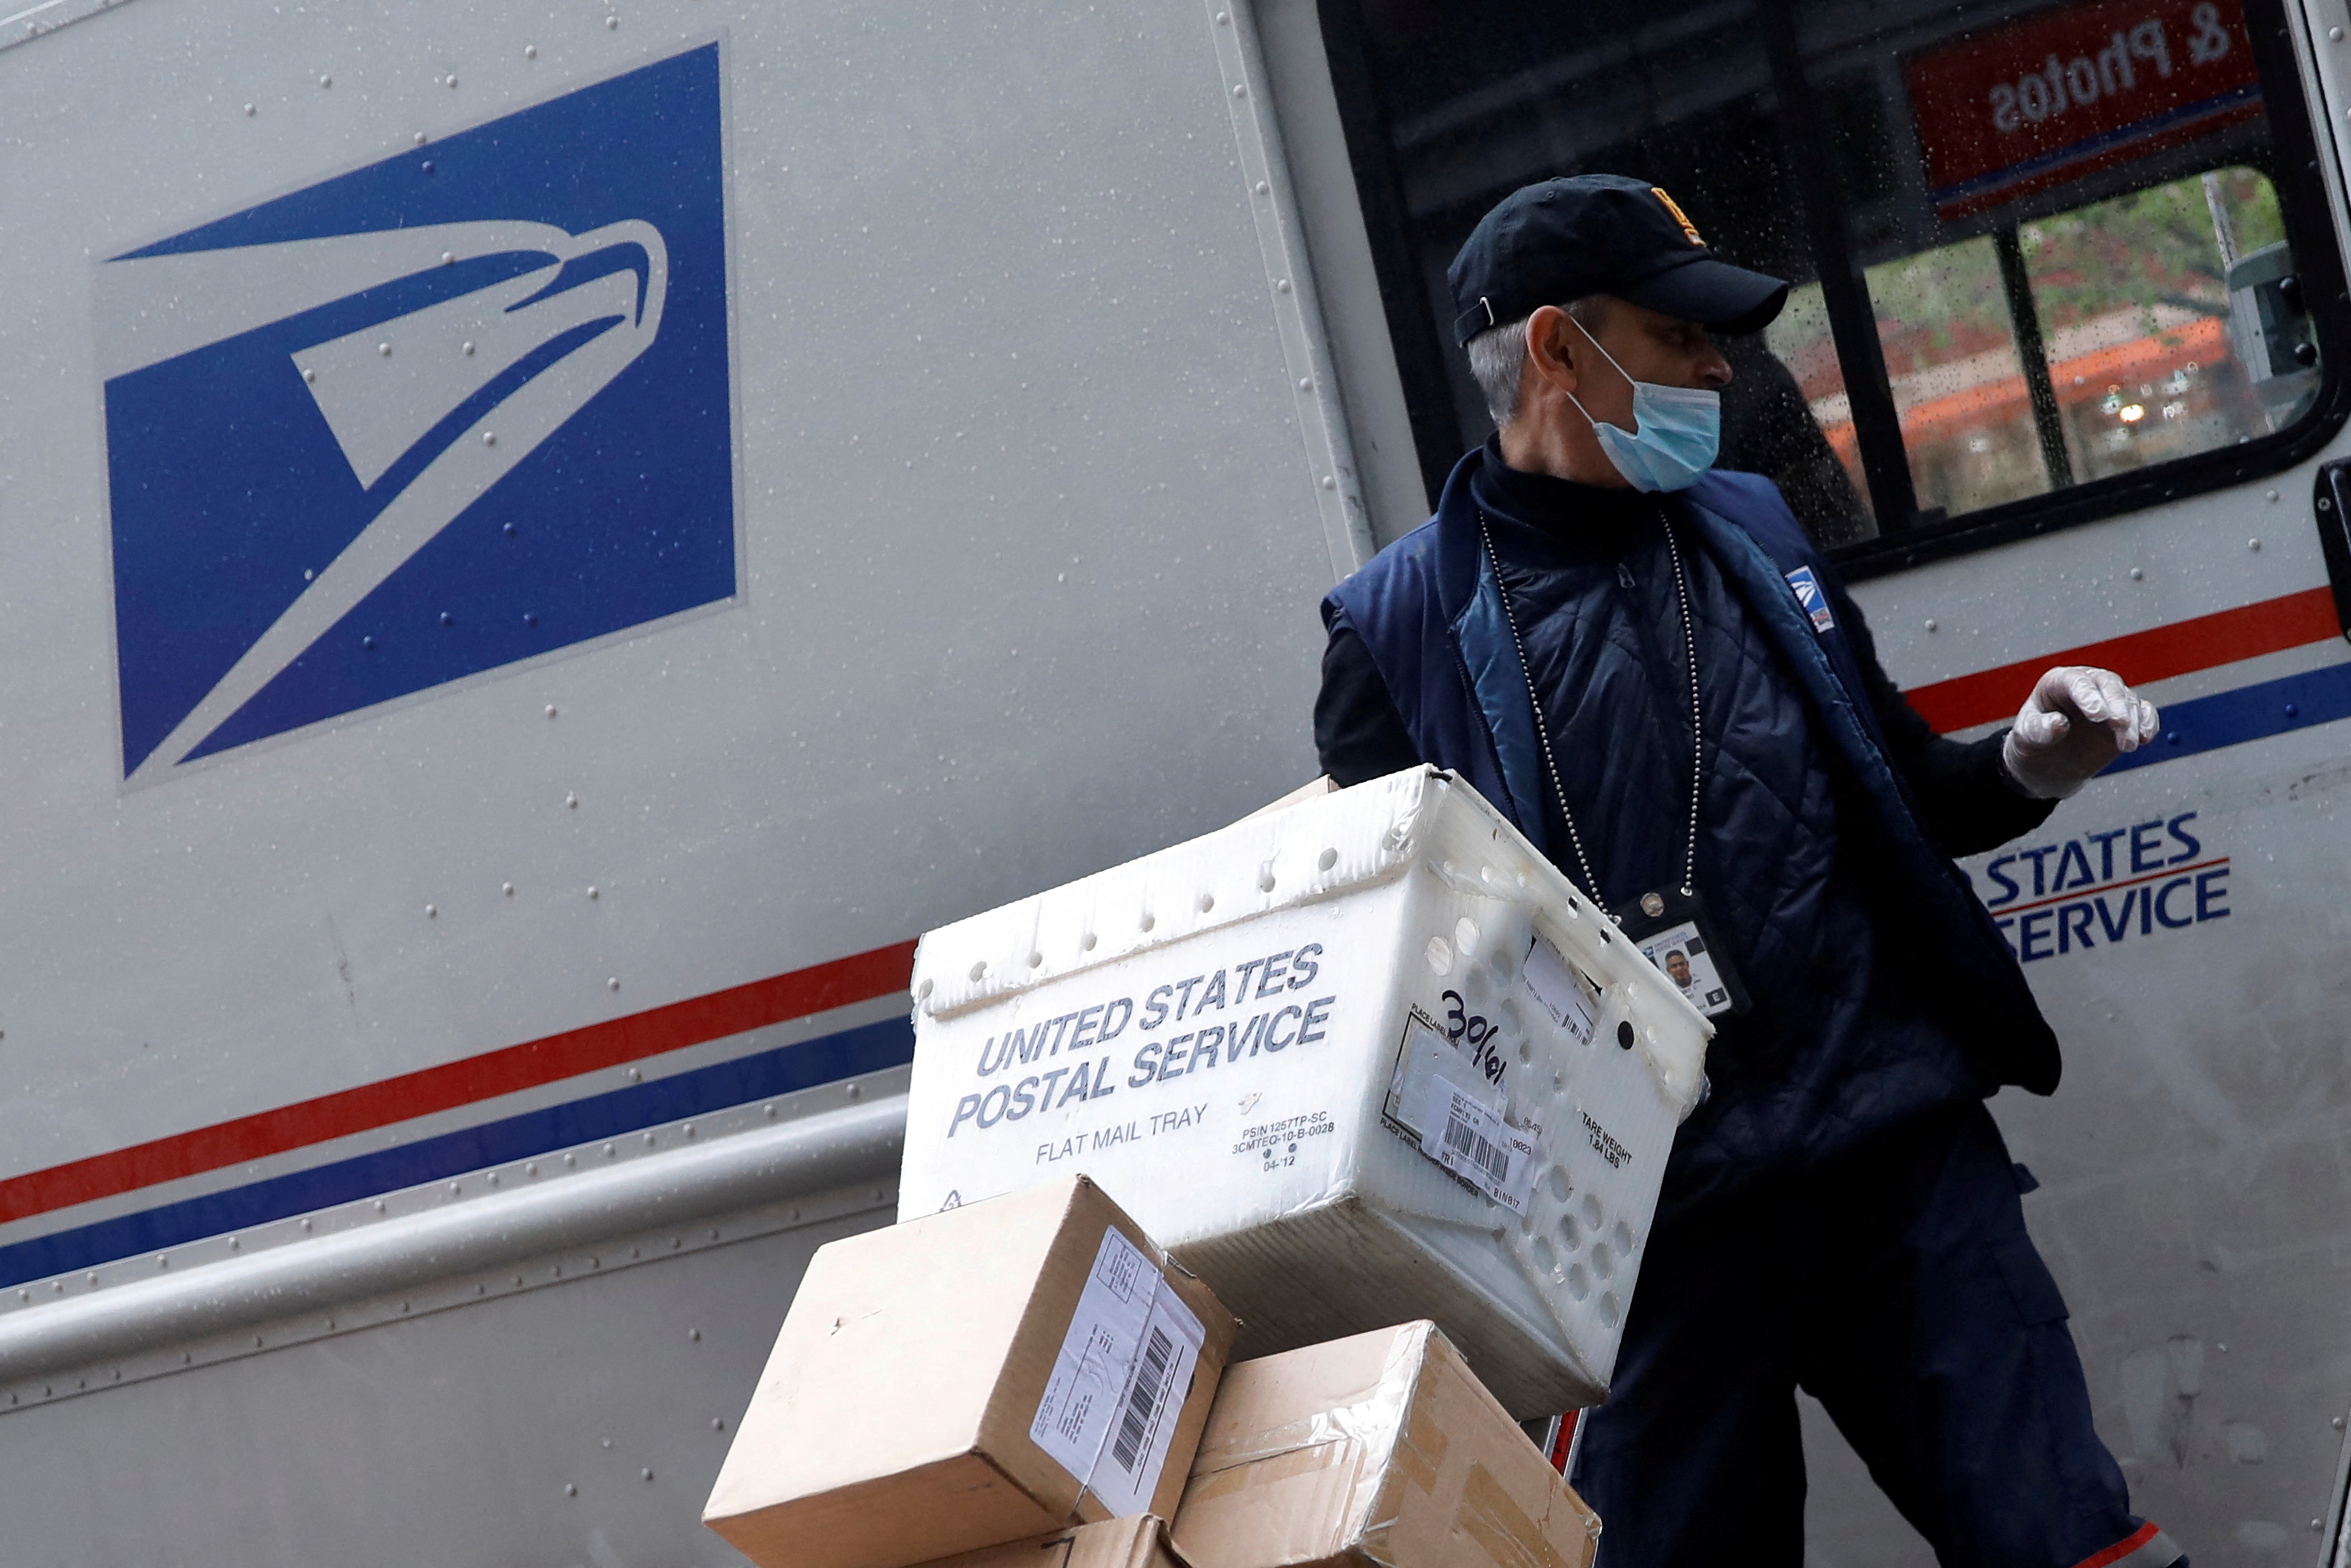 United States Postal Service (USPS) worker unloads packages in Manhattan during outbreak of coronavirus disease (COVID-19) in York